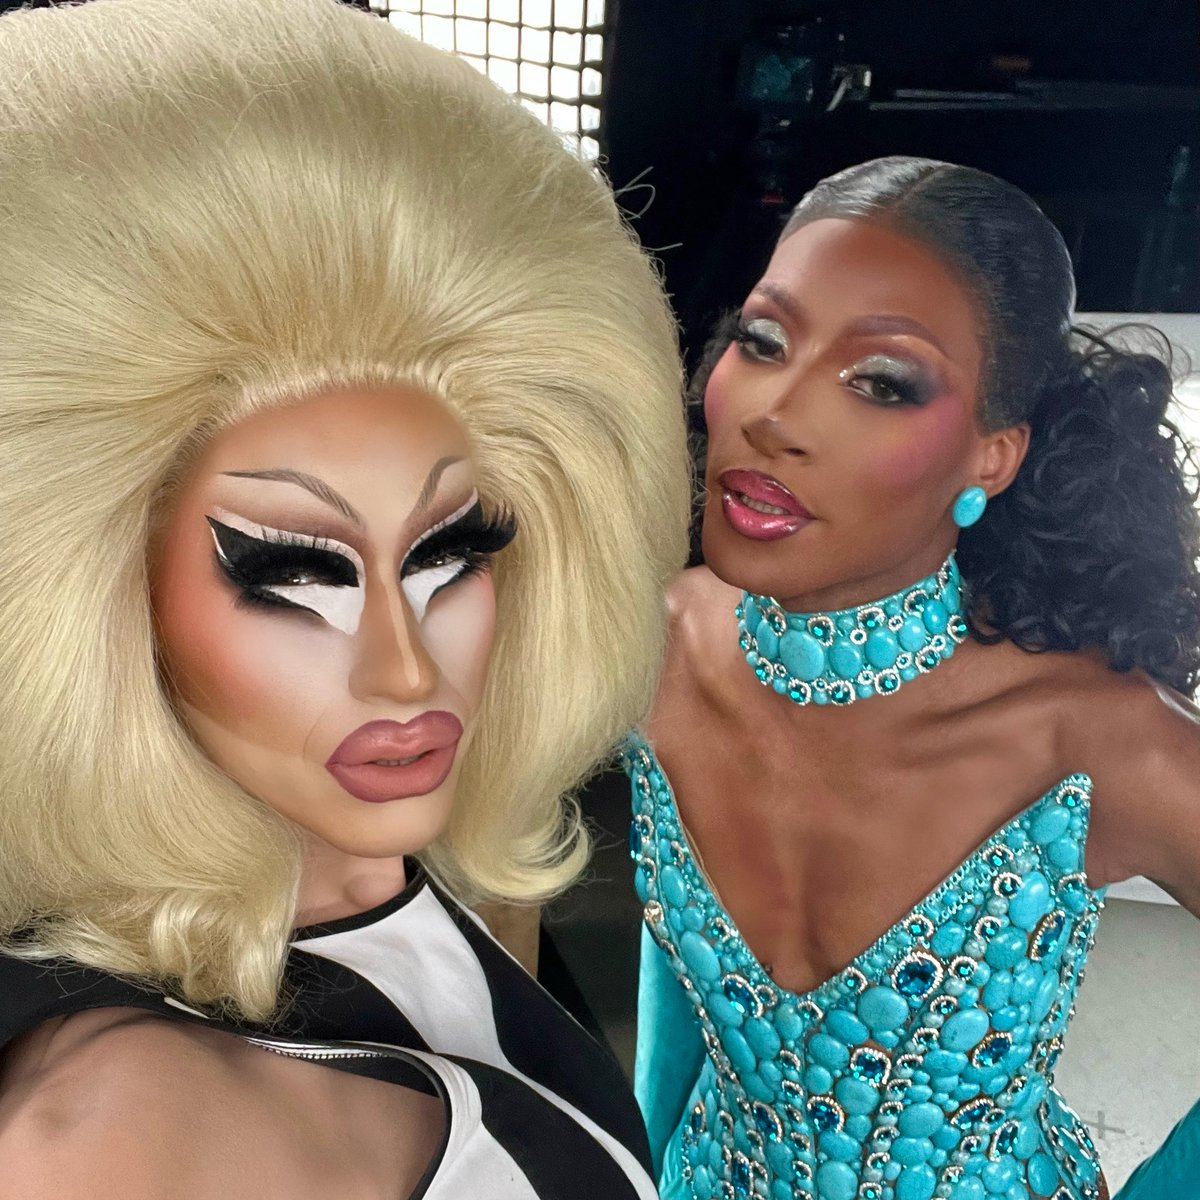 Hey b*tches, she's back! 🤭 @jaidaehall is at #ThePitStop with @trixiemattel TOMORROW on the #DragRace YouTube channel👑